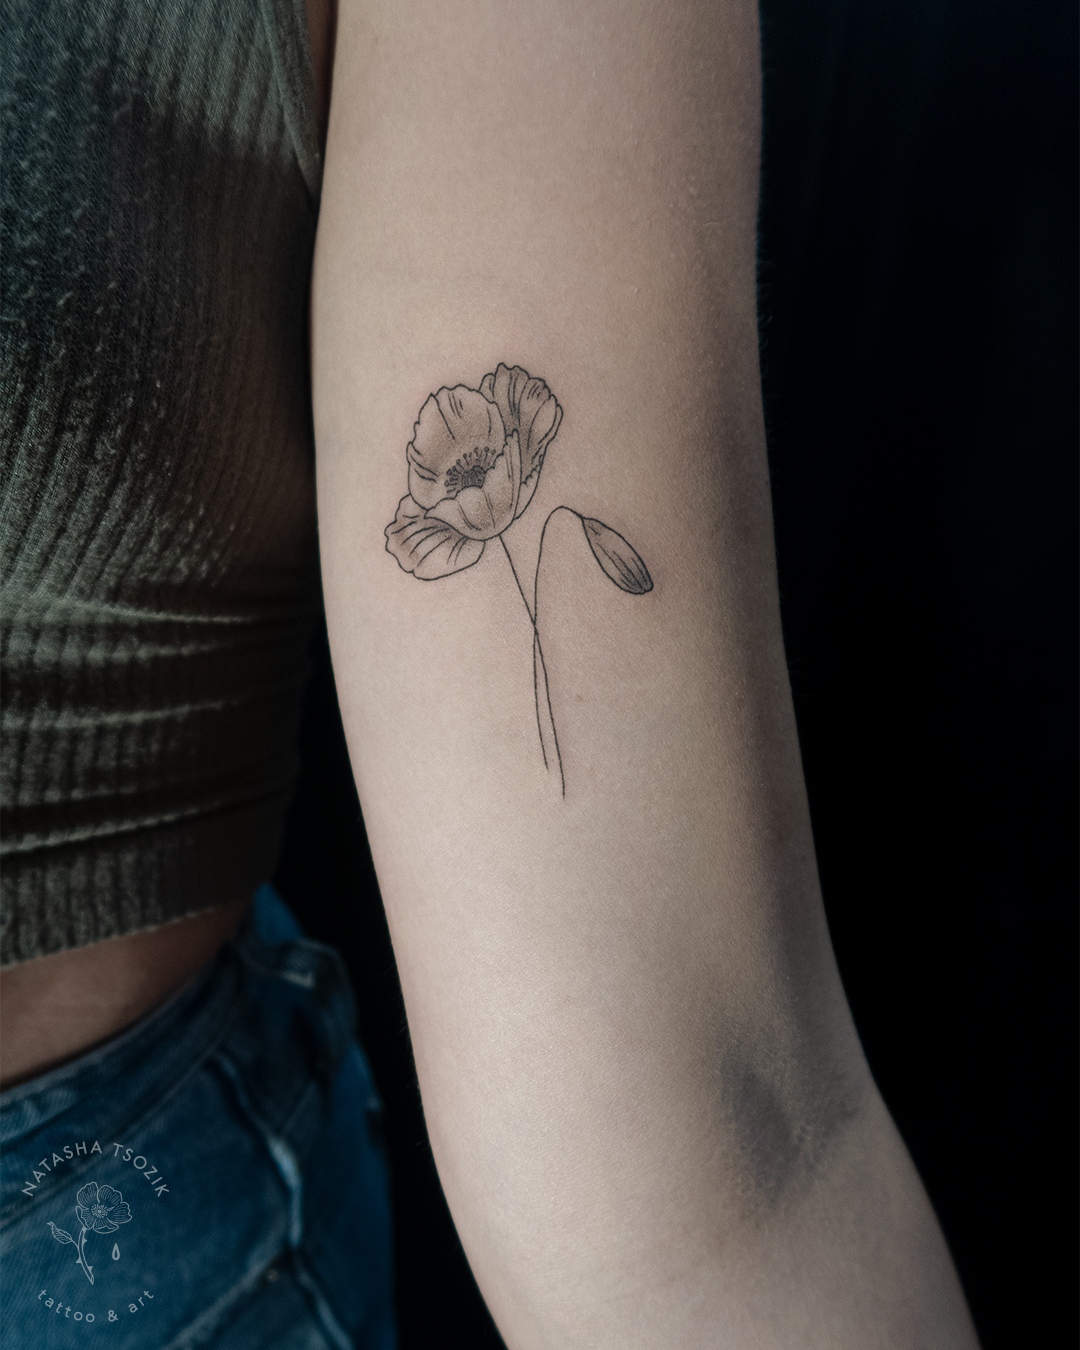 20 Inspired Poppy Tattoo Designs with Meanings